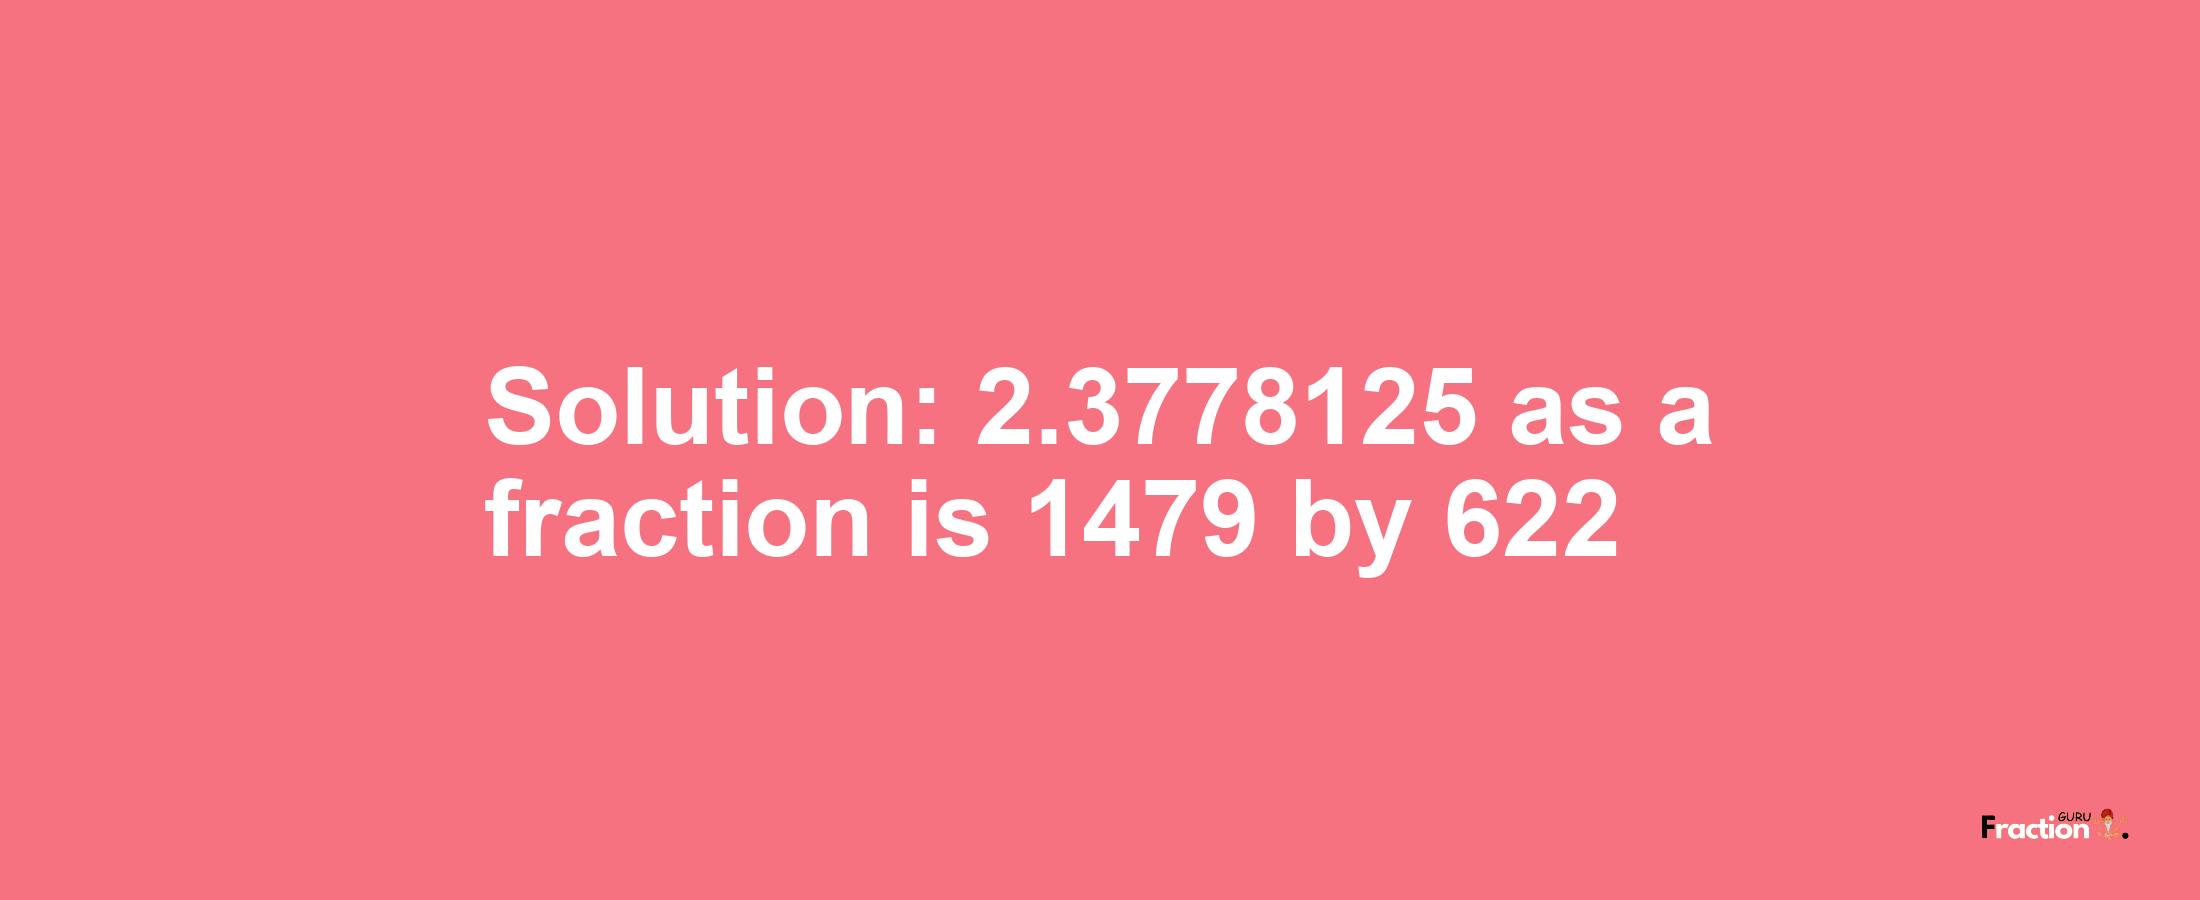 Solution:2.3778125 as a fraction is 1479/622